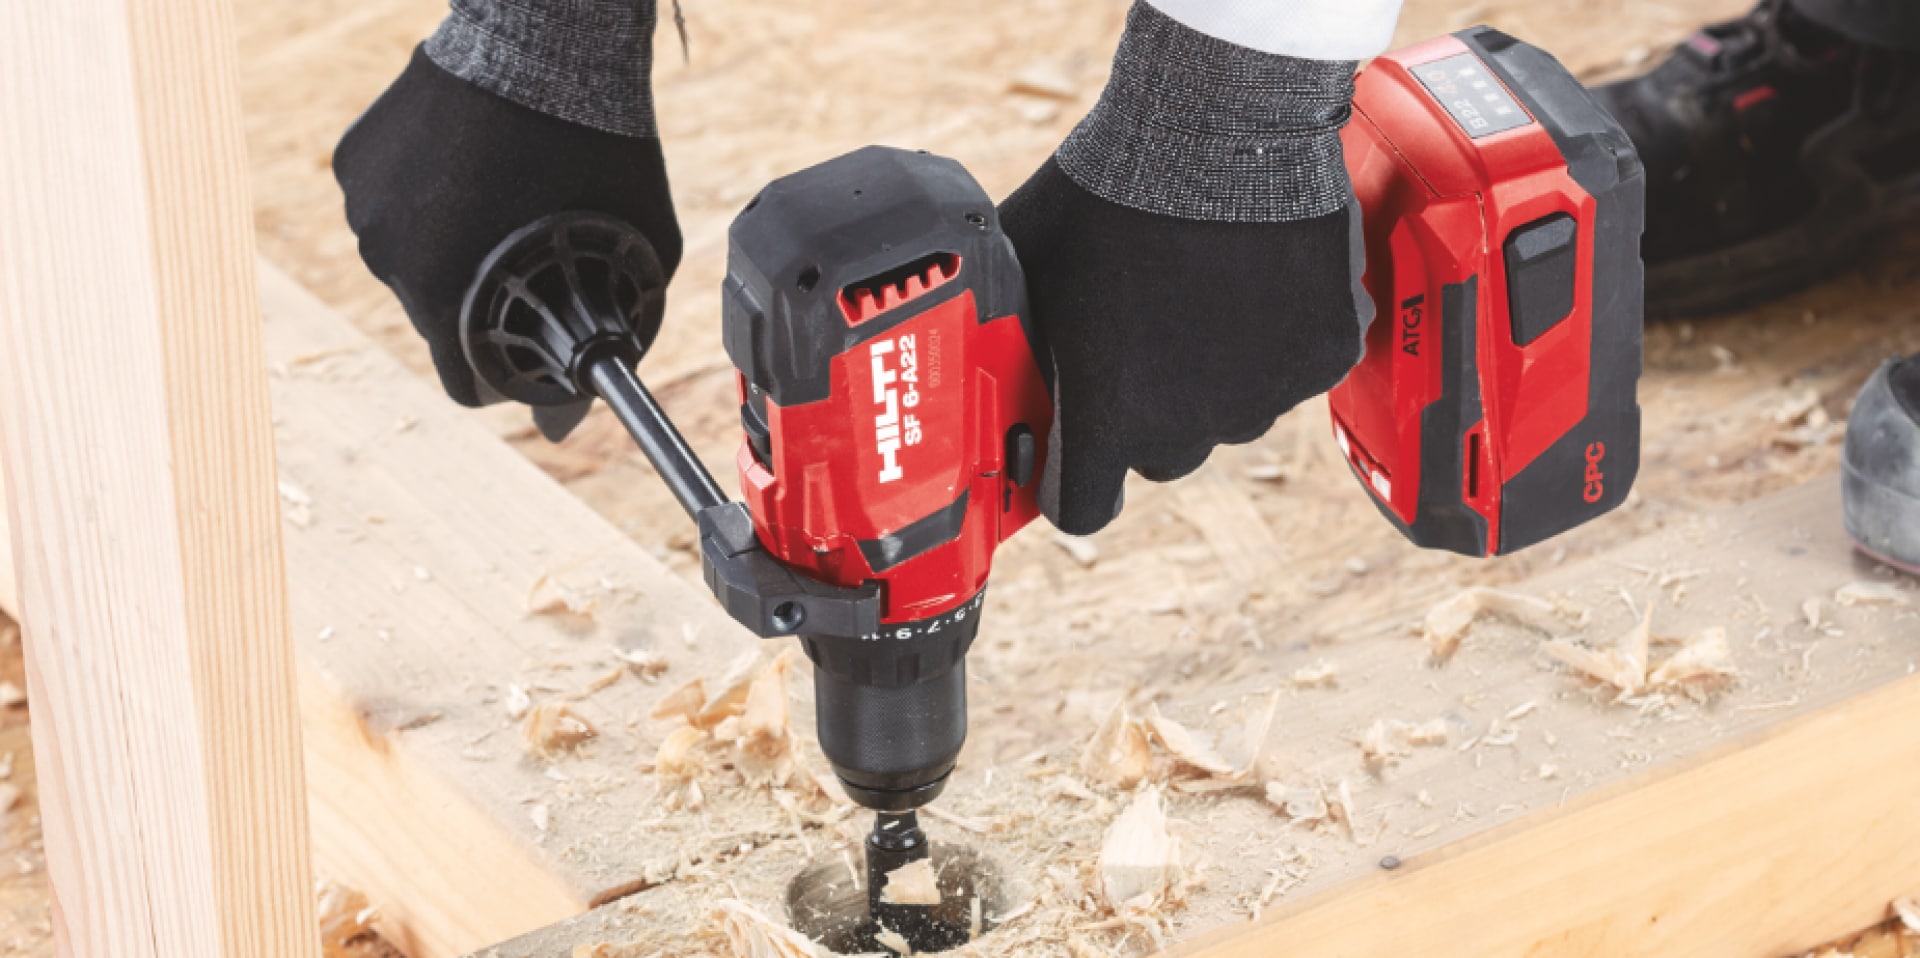 The SF 6-A22 and SF 6H-A22 is compatible with the full range of 22V tools